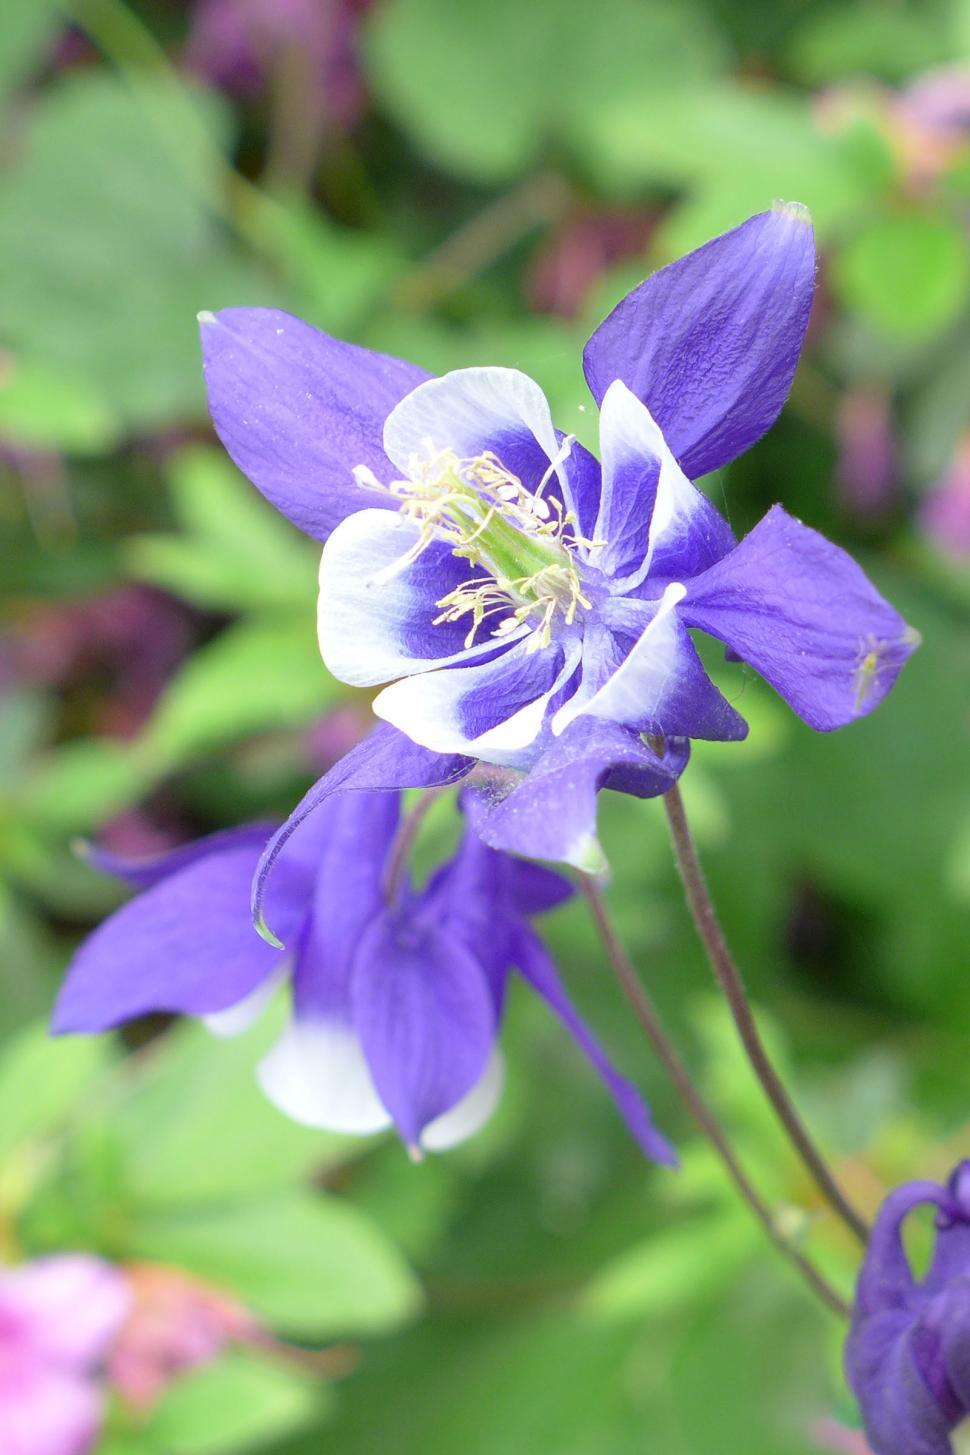 Free Image of Blue and White Columbine Flower Bloom 